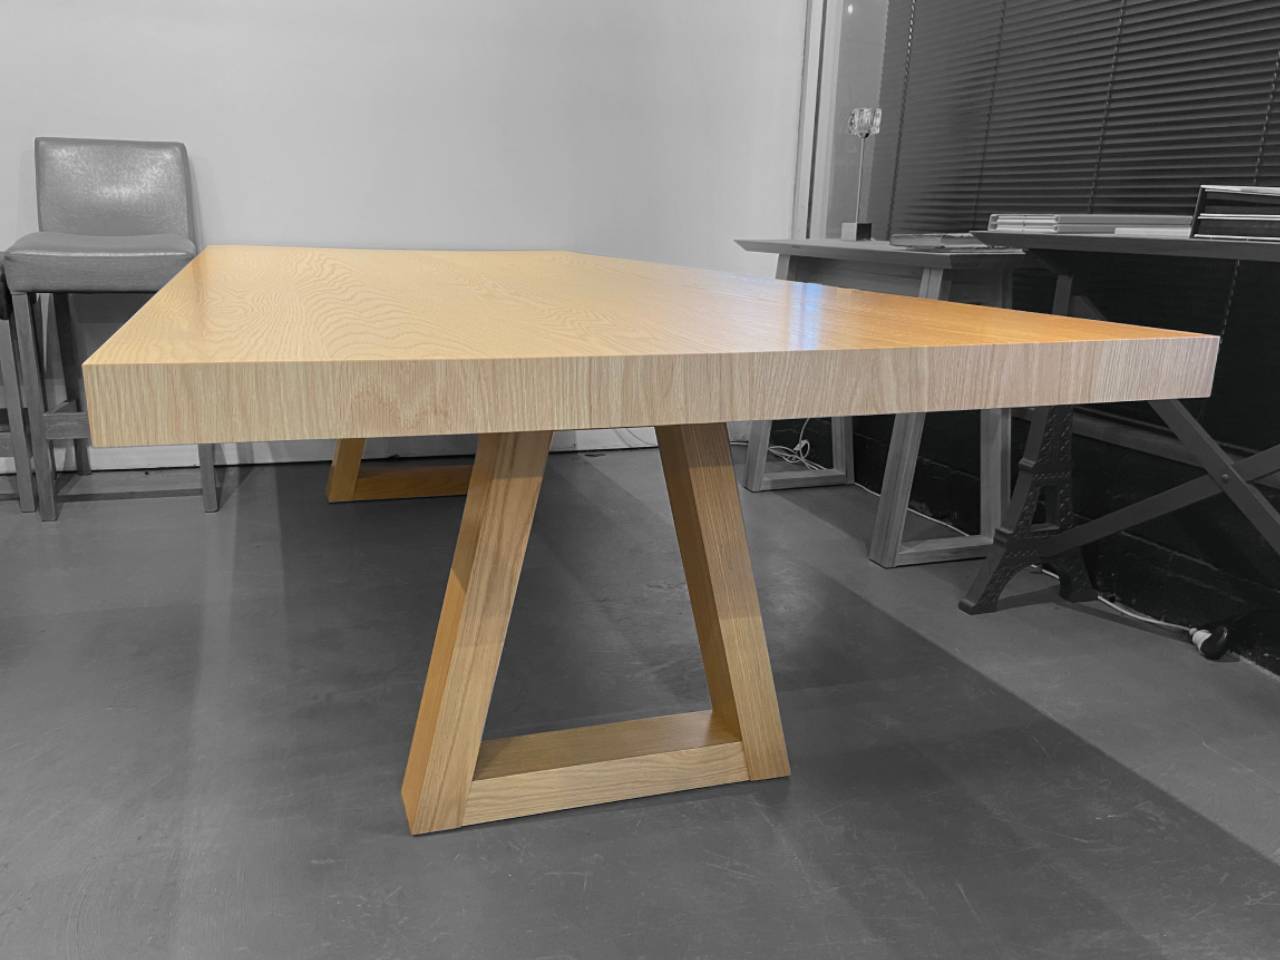 KT 10/12 Seater Dining Table American Oak Timber 2 Pack Polyurethane Quality Furniture Made in Adelaide, South Australia